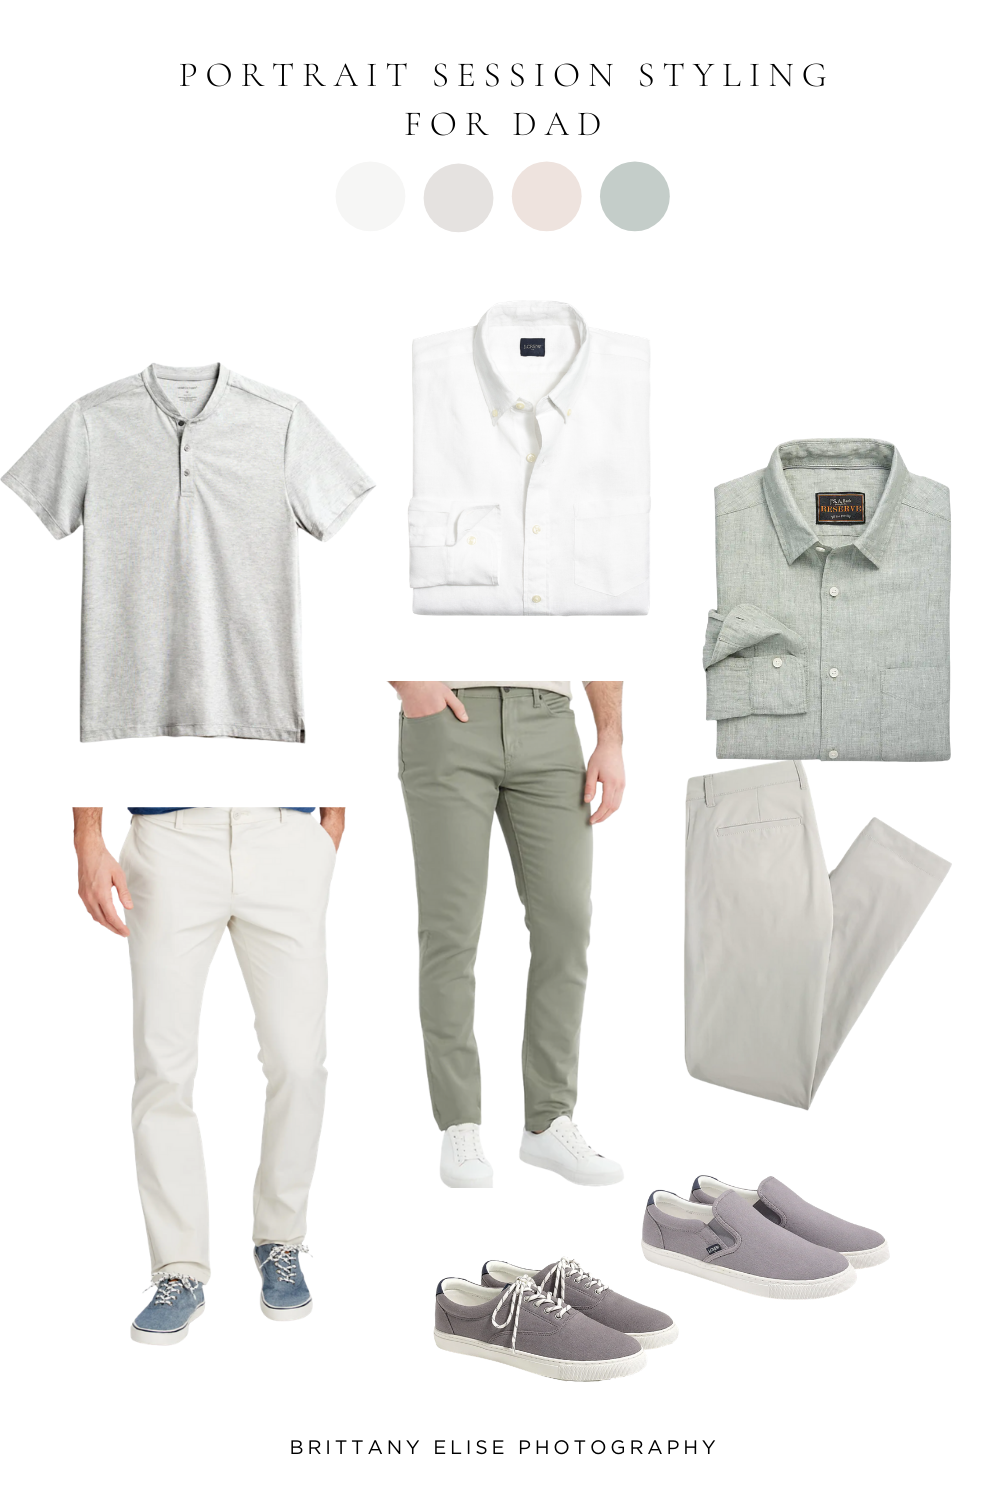 Graphic by Brittany Elise Photography showing Dad what to wear for a photo session. Outfits include options in white, sage green, khaki and grey tones. 